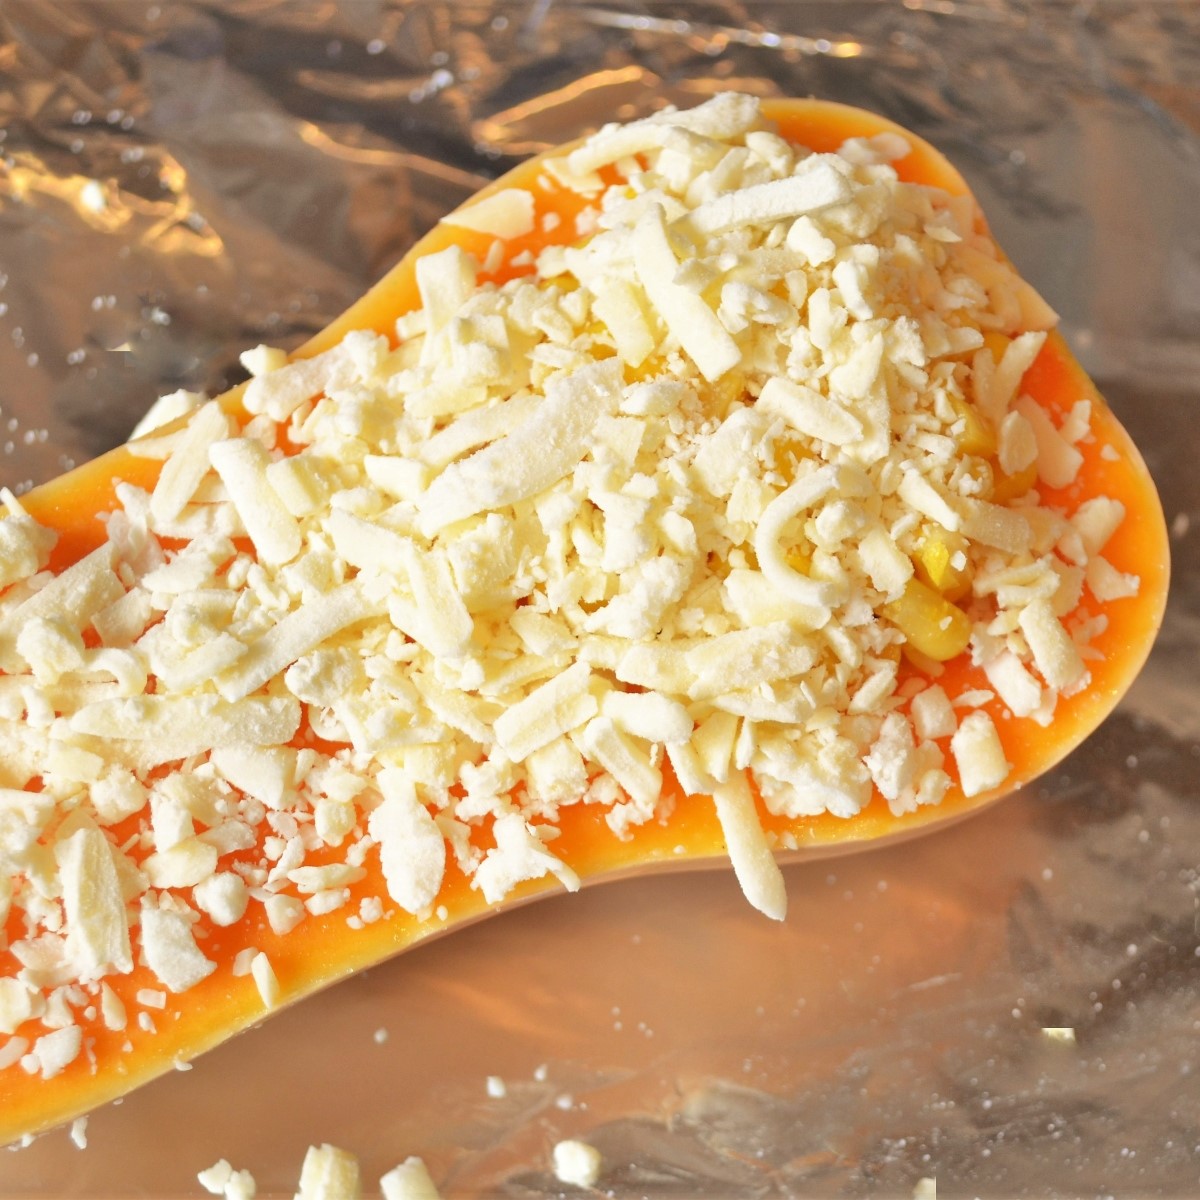 Half a butternut, stuffed with cheese and corn, on a baking tray.